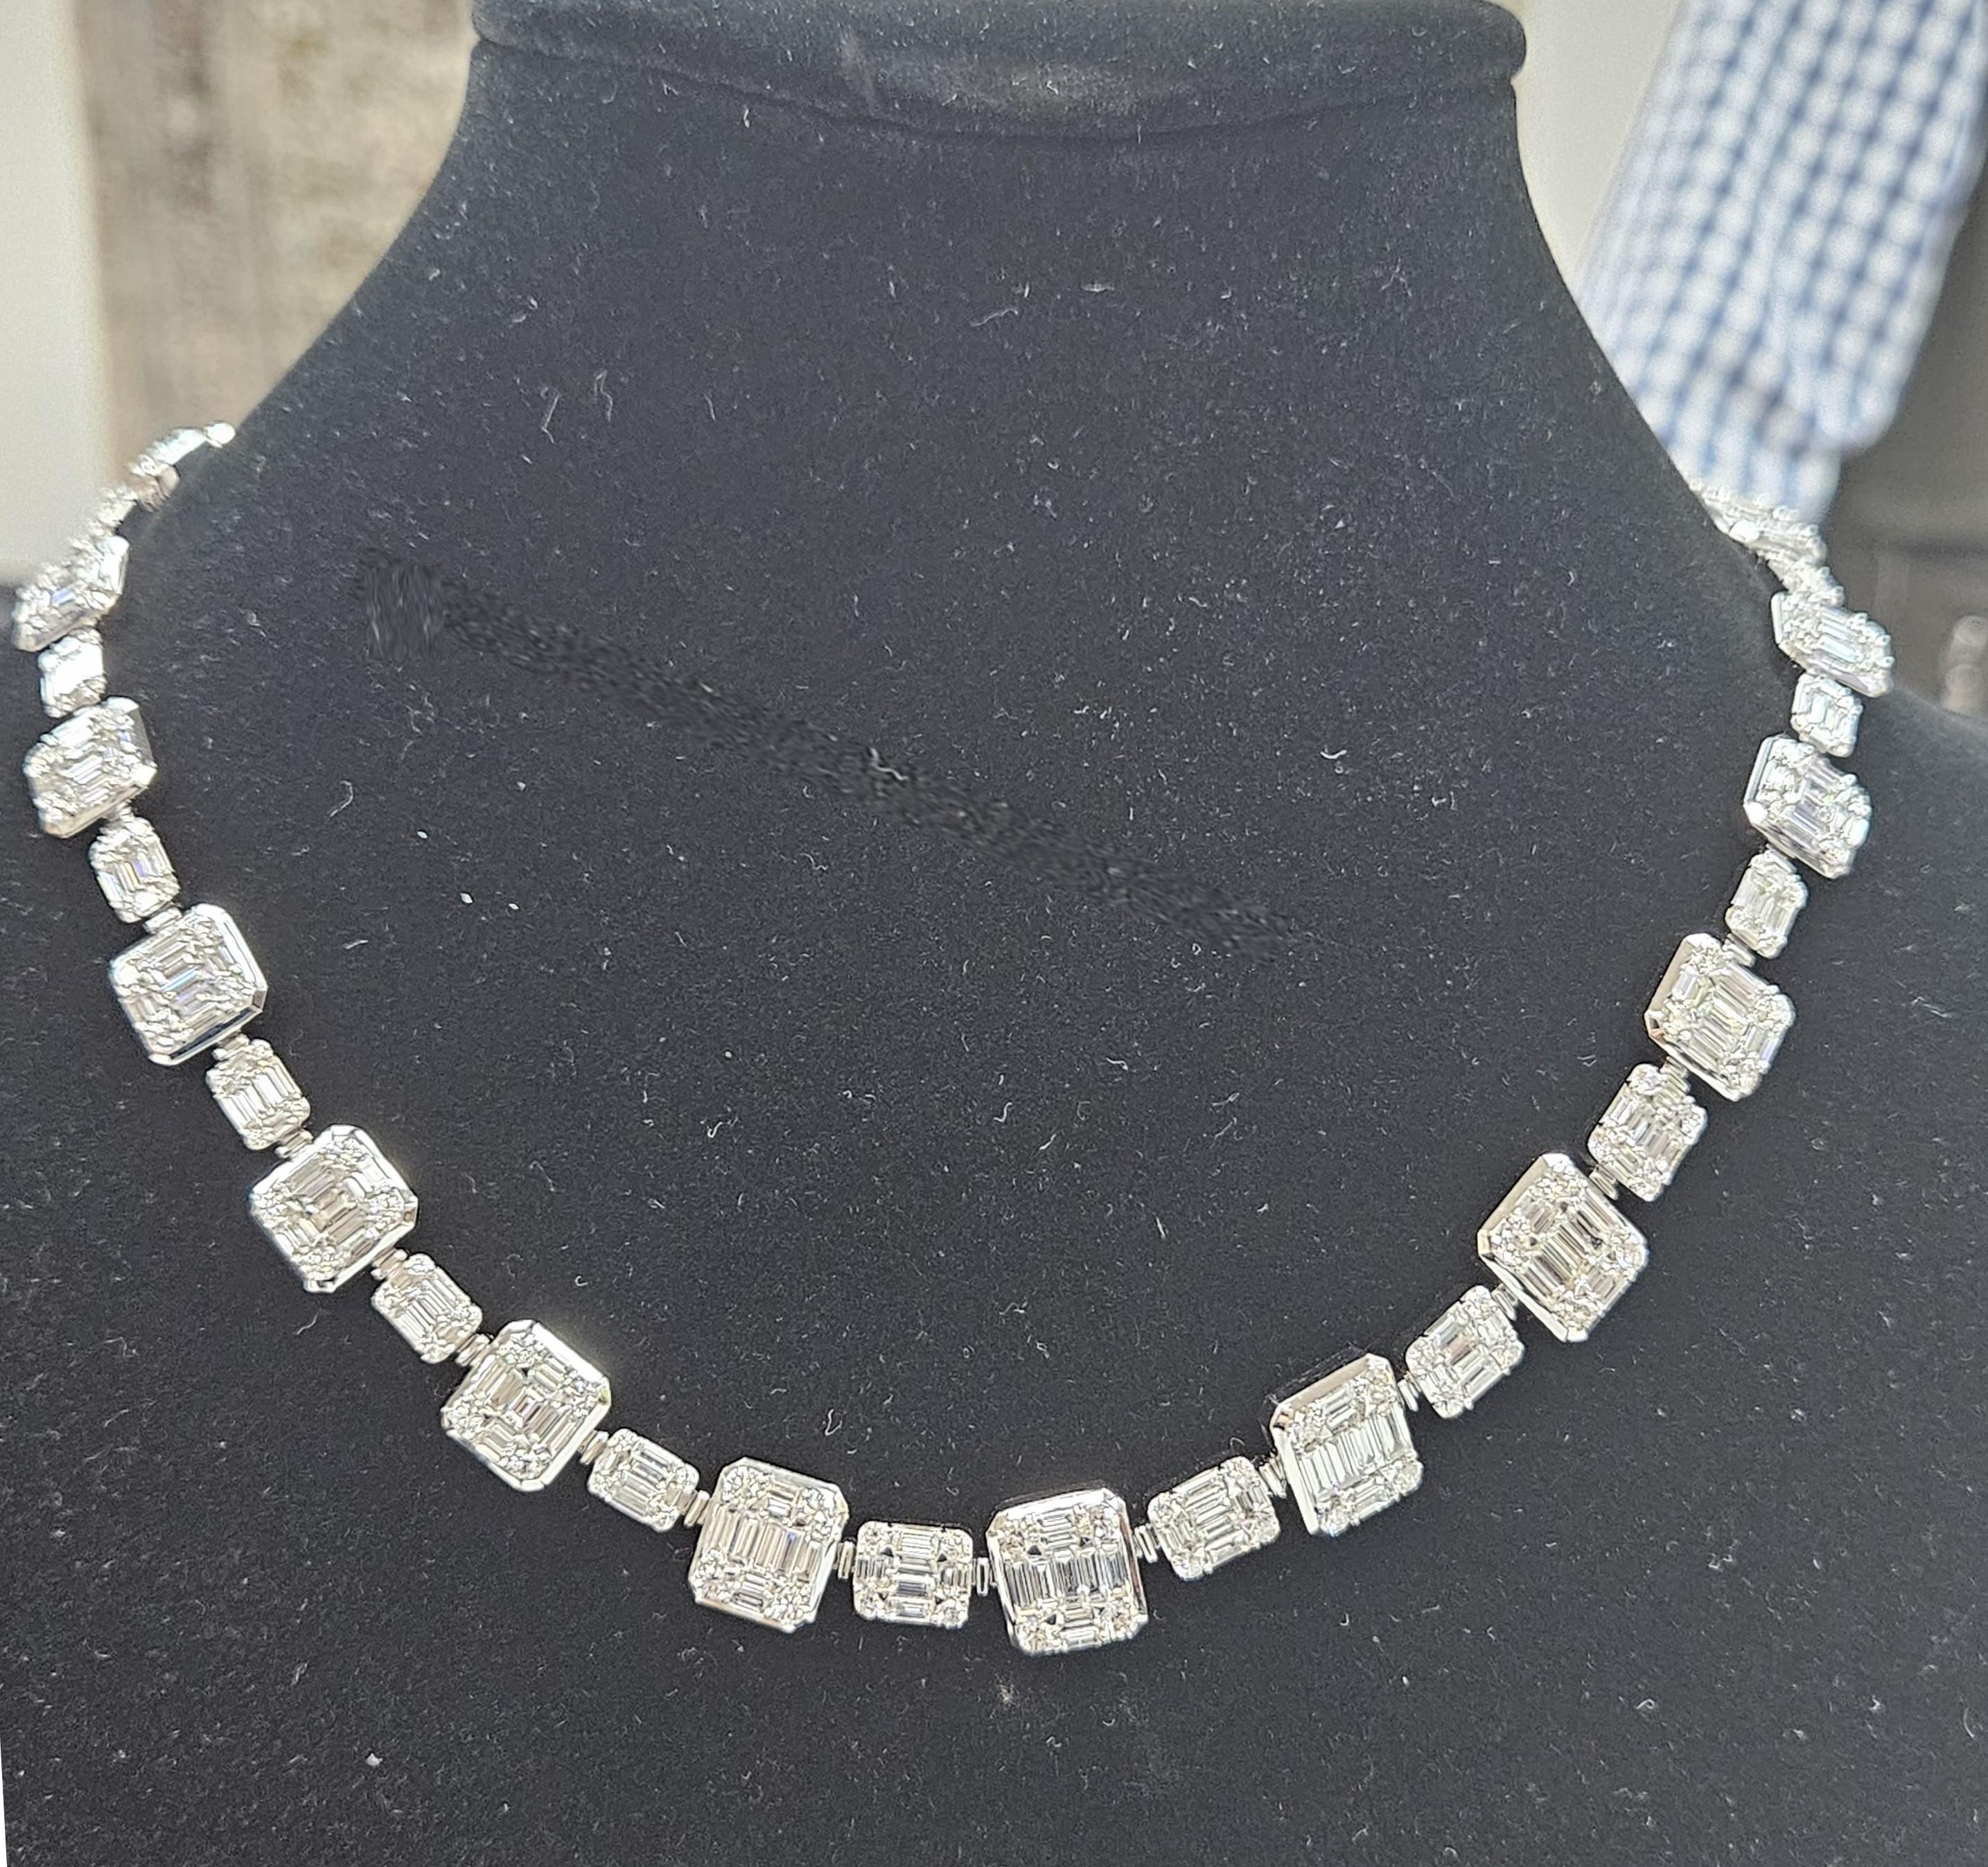 The Following Item we are offering is this Rare Important Radiant 18KT Gold Gorgeous Glittering and Sparkling Magnificent Fancy Diamond Detachable Drop Necklace. Necklace contains approx 28CTS of Beautiful Glittering Diamonds all set in 18KT Gold